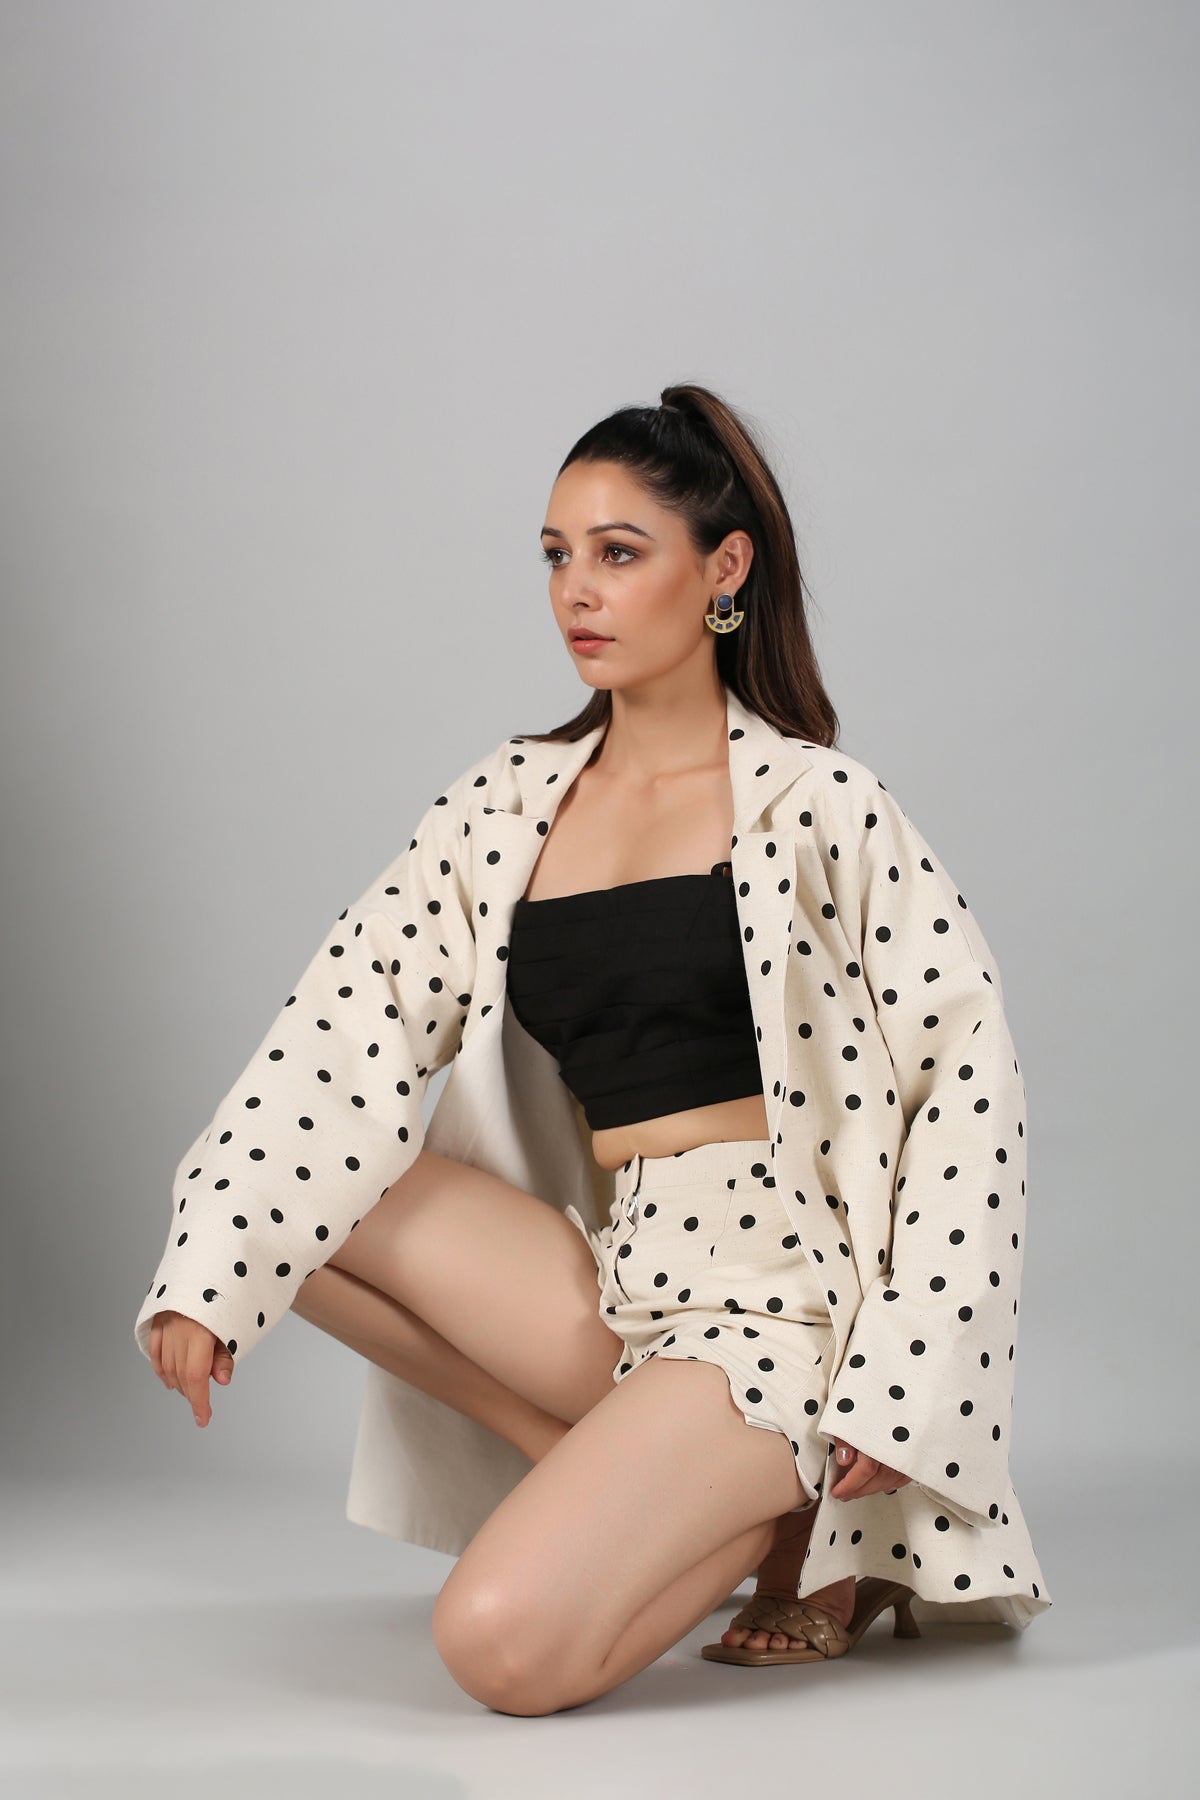 Polka Blazer Co Ord Set at Kamakhyaa by MOH-The Eternal Dhaga. This item is Cotton, Cotton Slub, Moh-The eternal Dhaga, Natural, Polka Dots, Prints, Regular Fit, Resort Wear, Vacation Co-ords, White, Womenswear